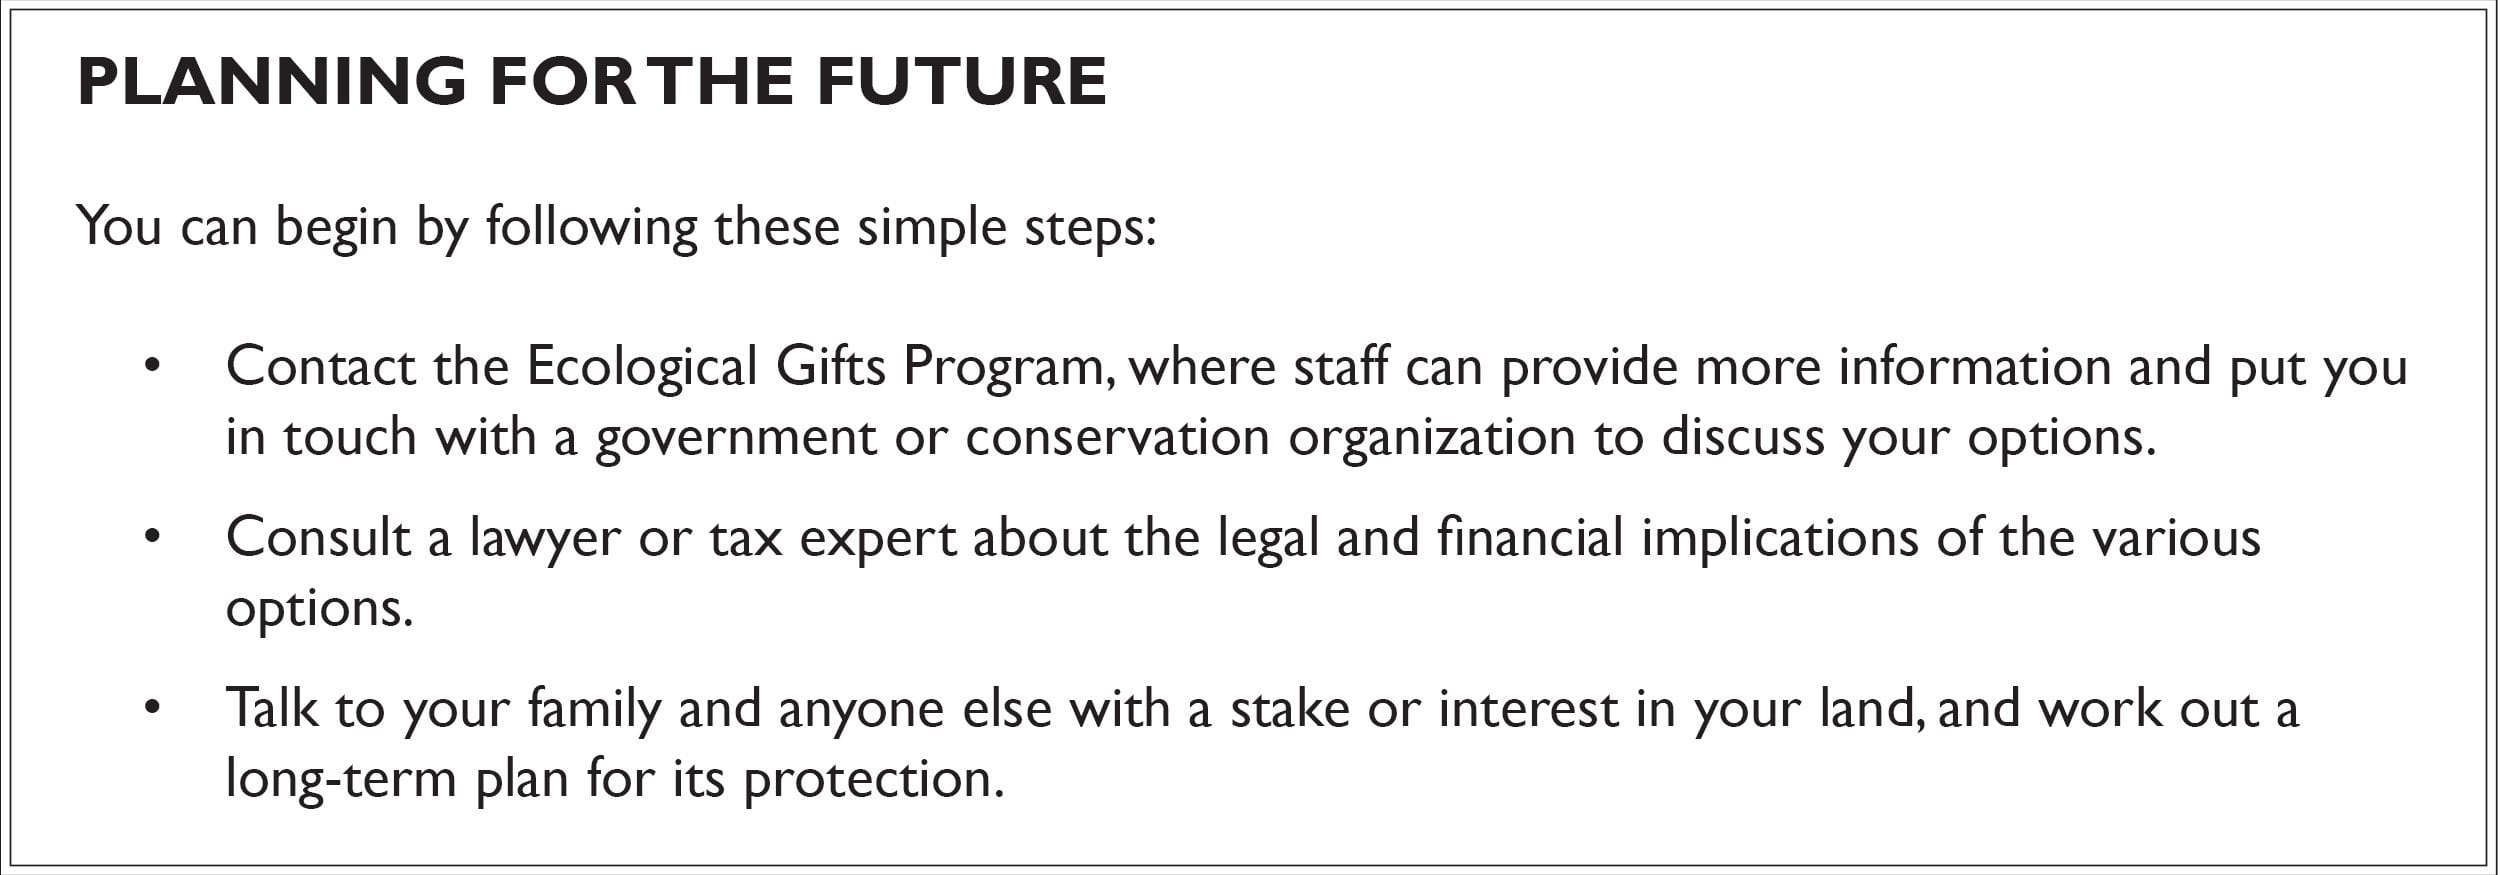 planning for the future simple steps